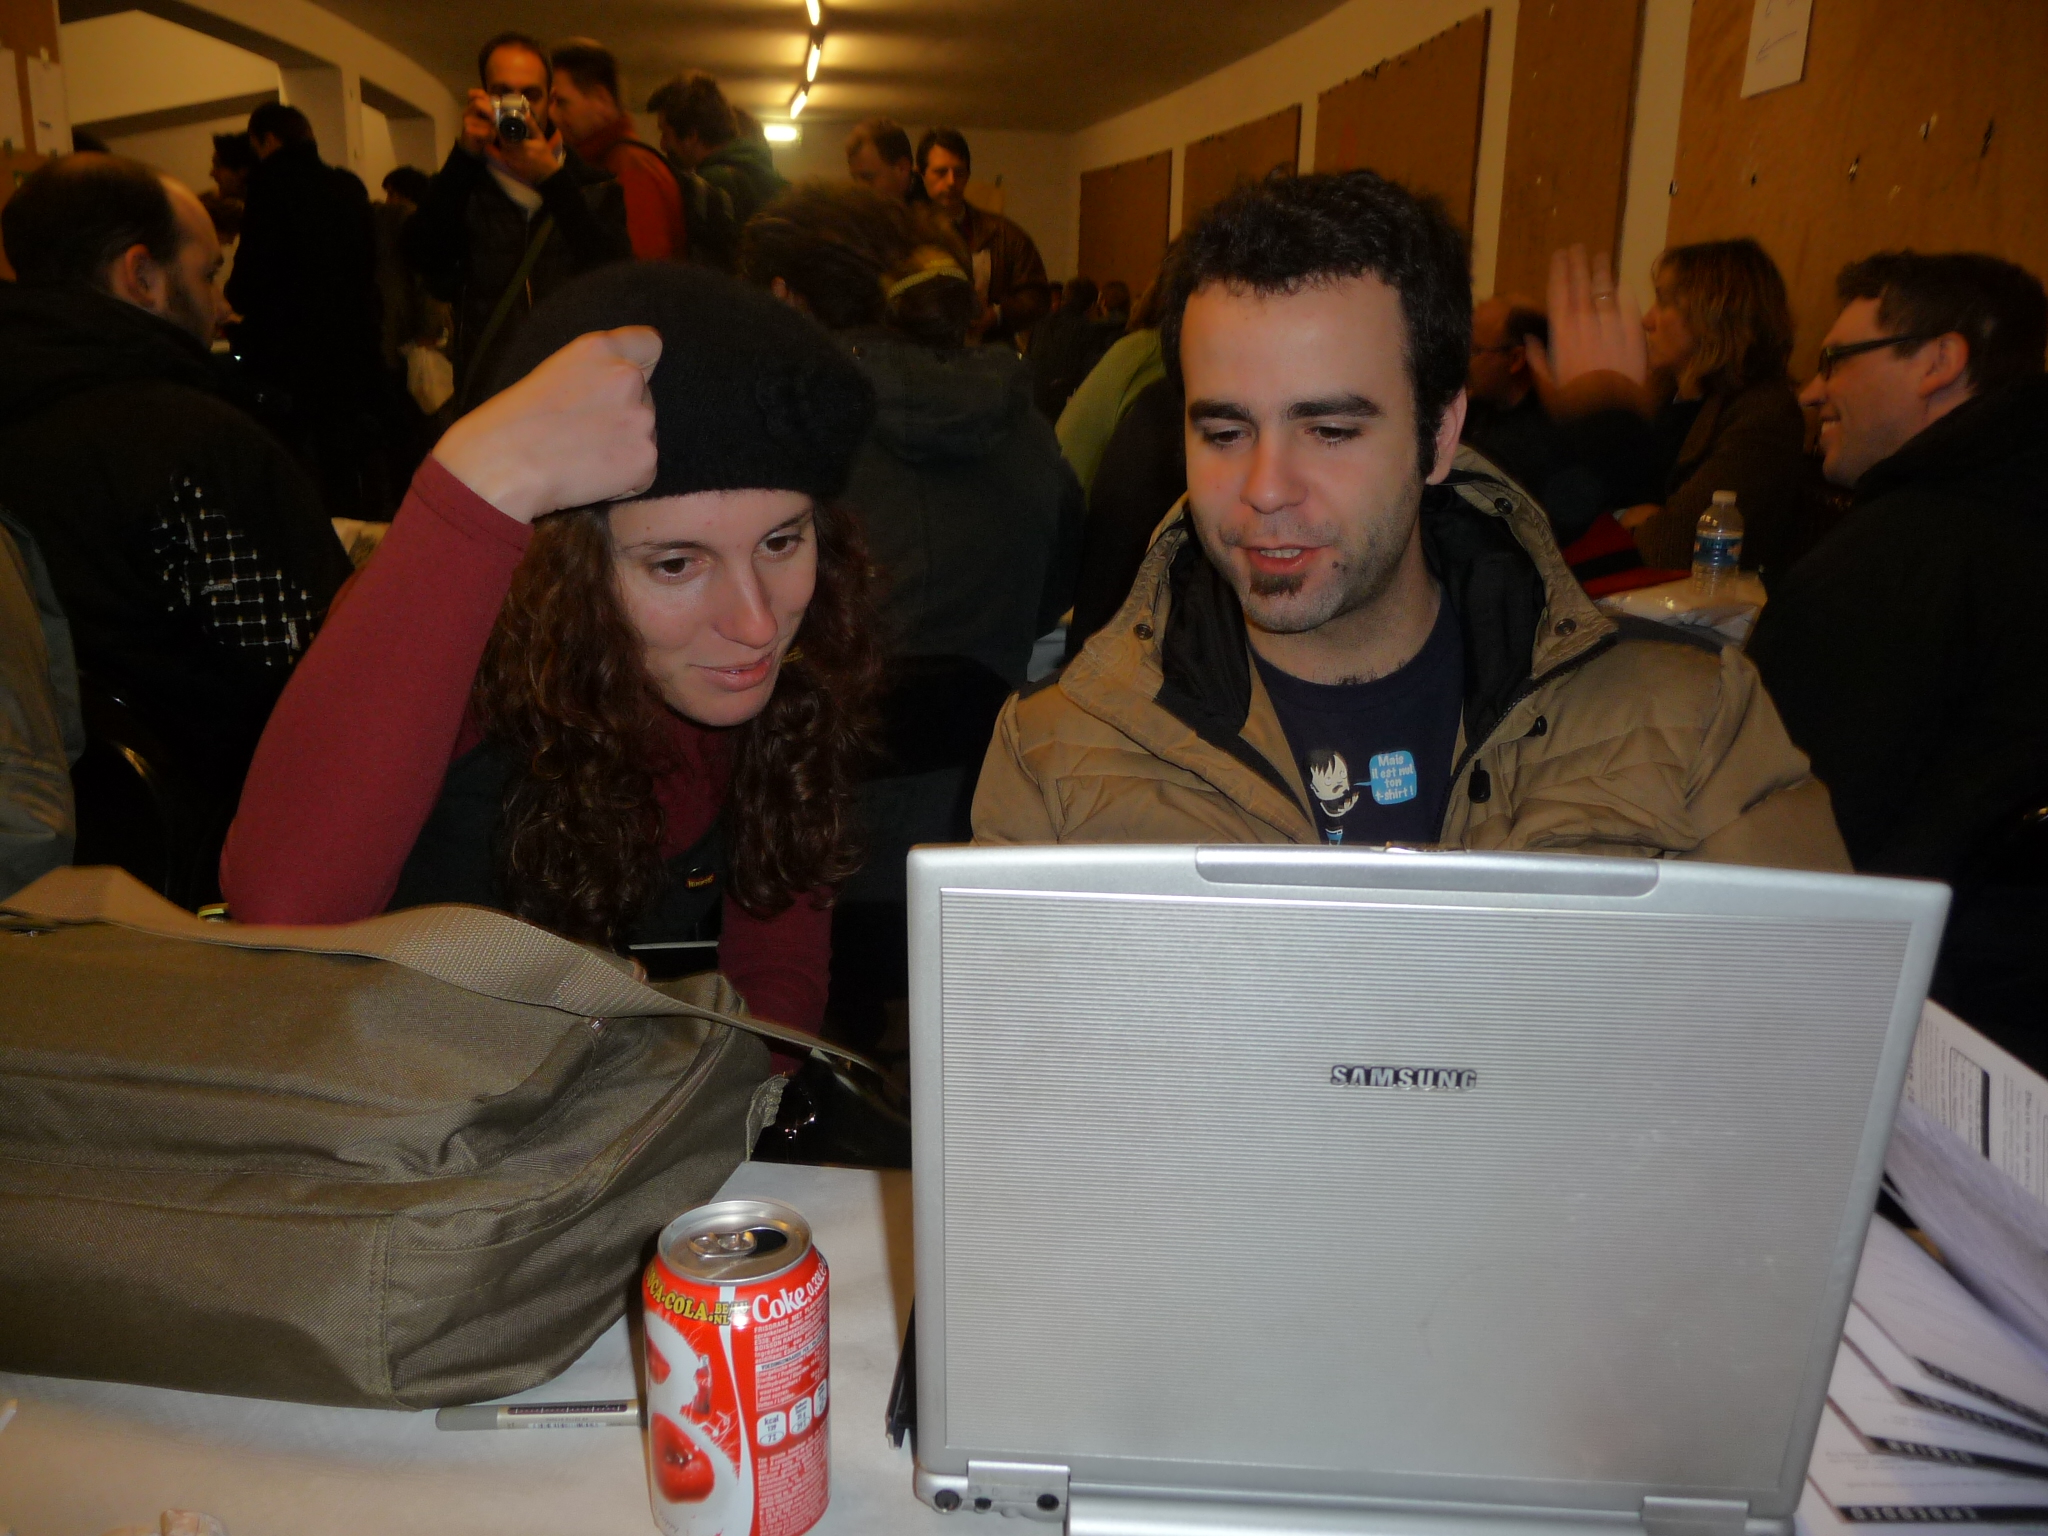 a woman and man are looking at a laptop